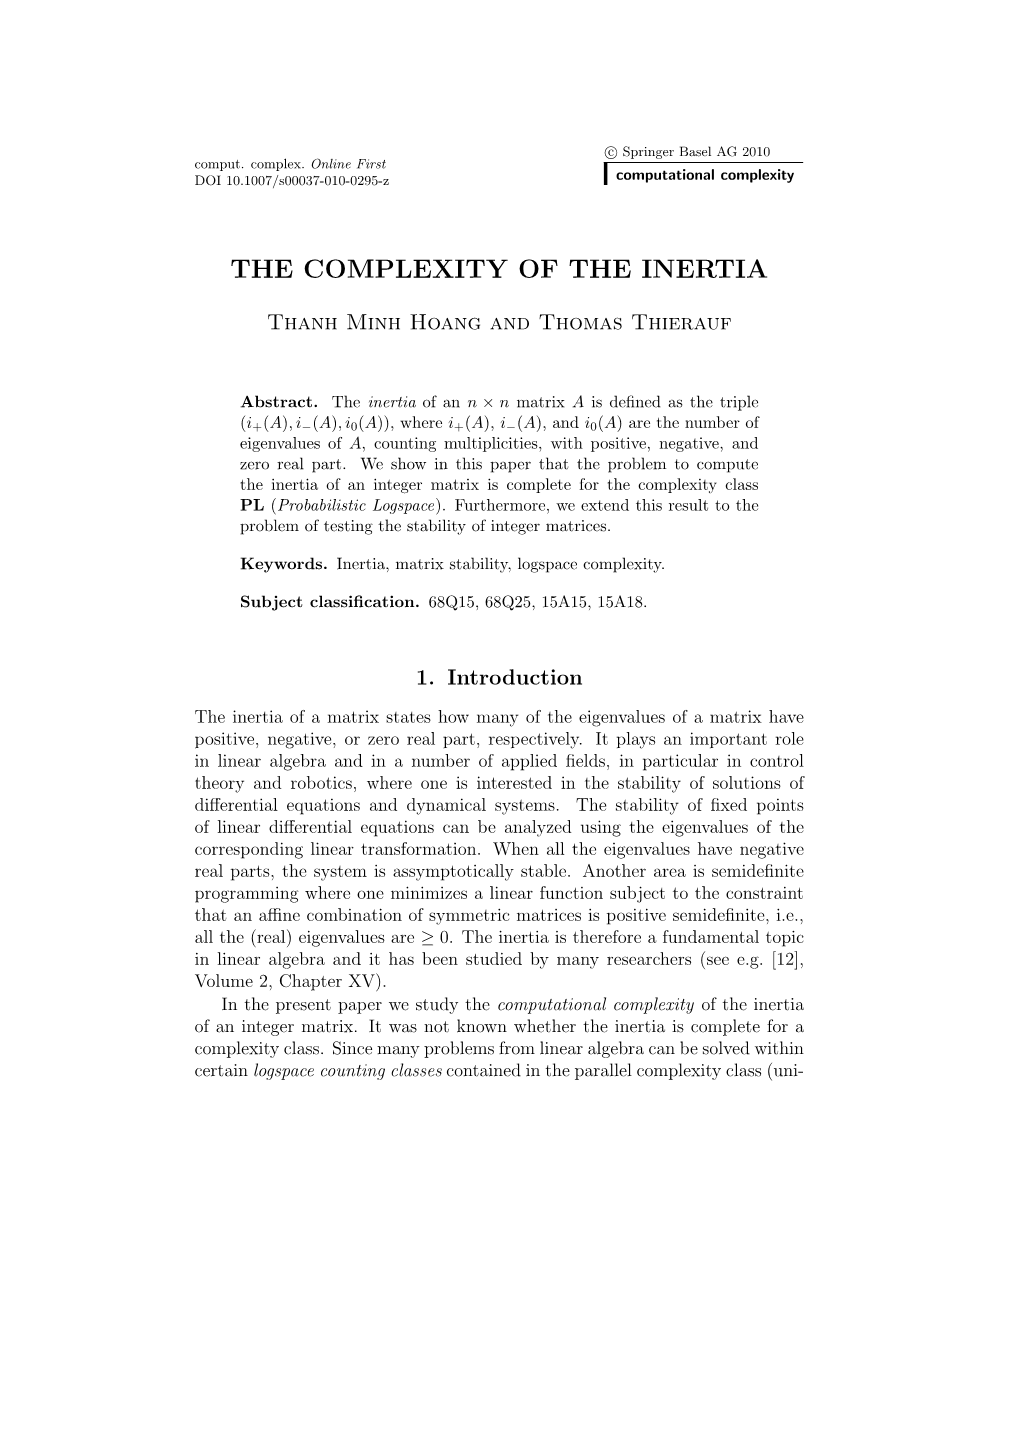 The Complexity of the Inertia